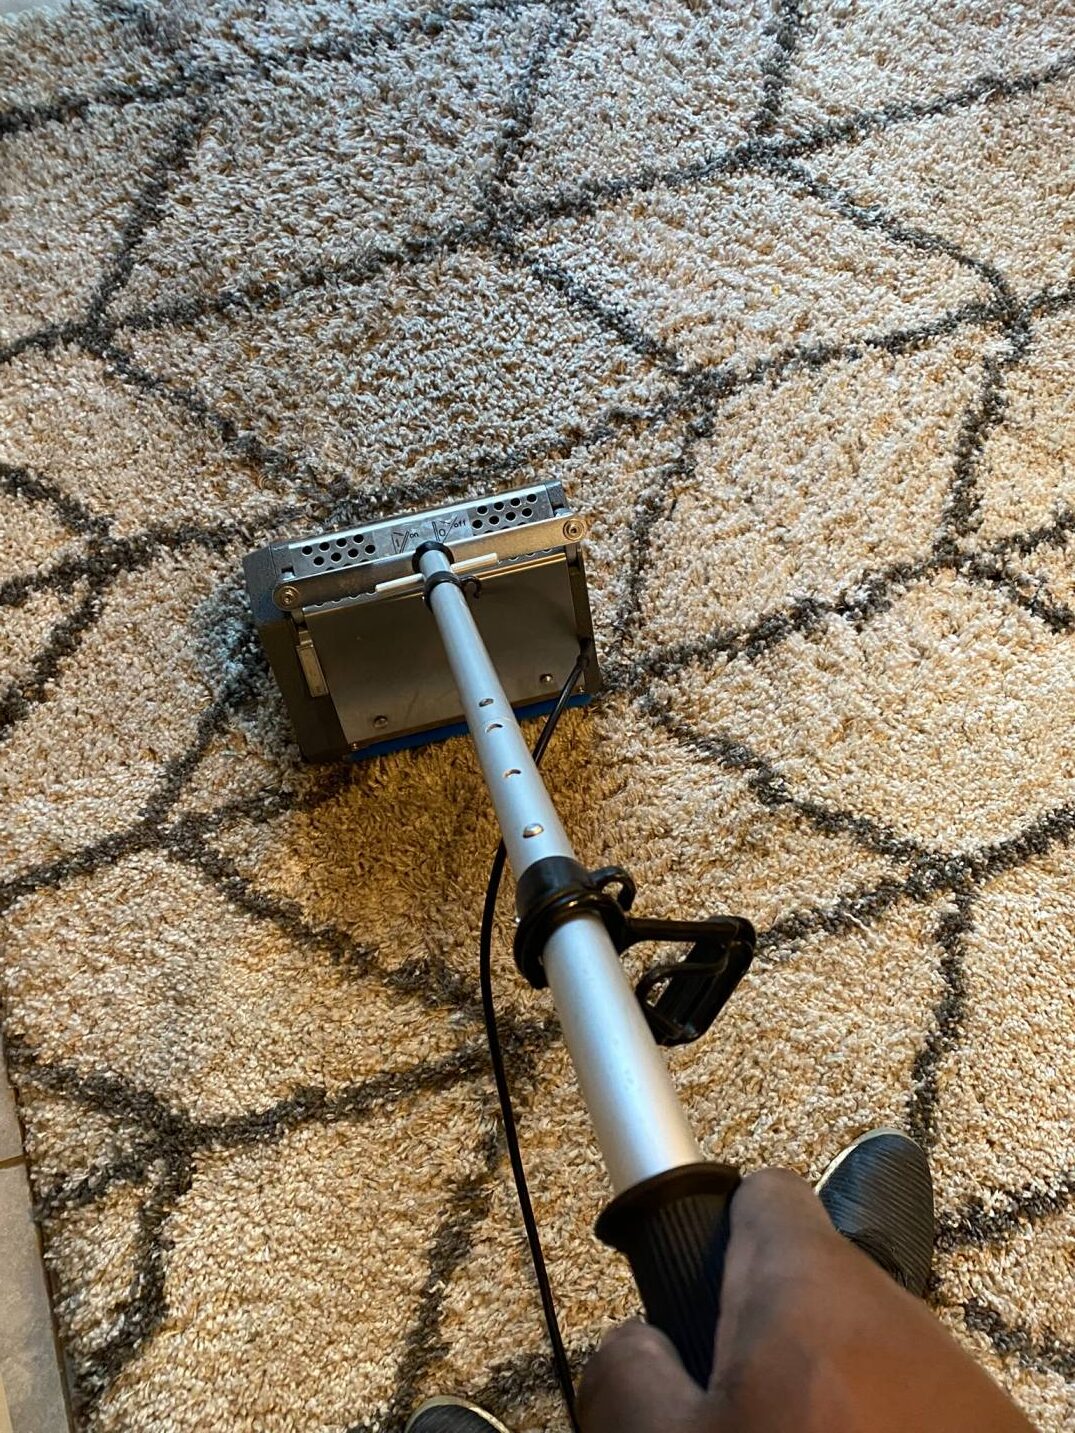 Steam Cleaning machine used over dirty area rug